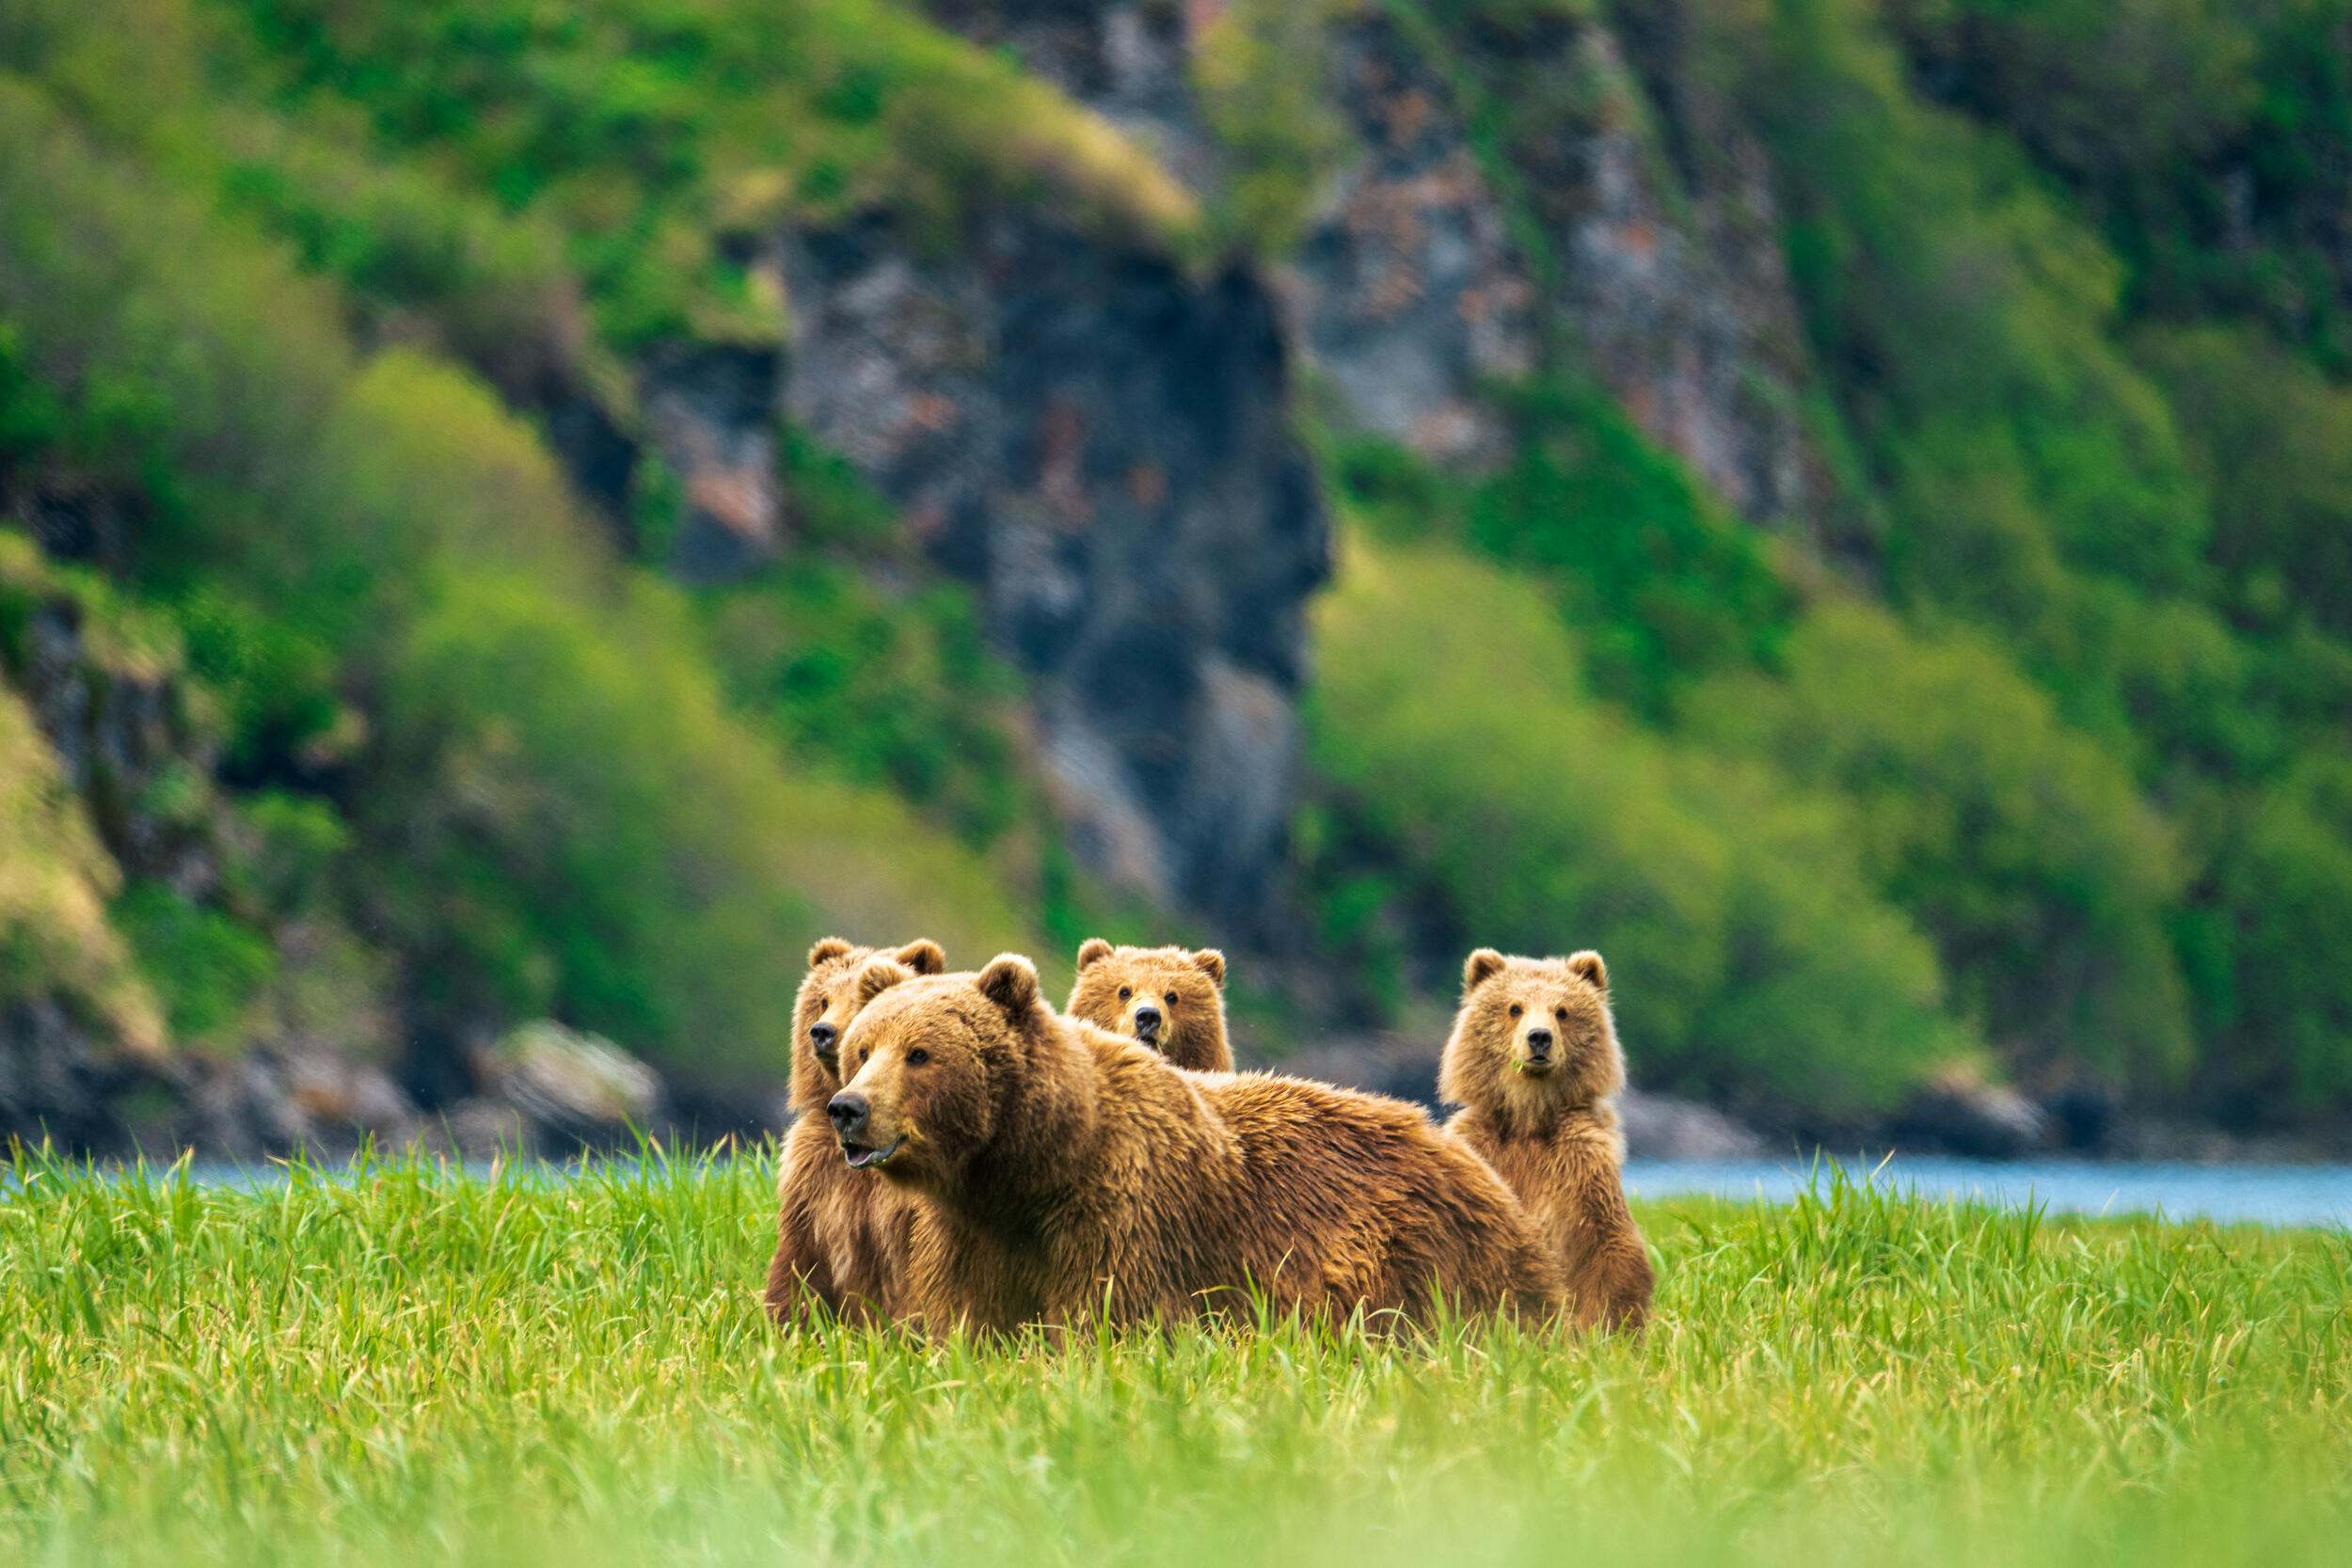 A family of brown bears sit in a grass field.